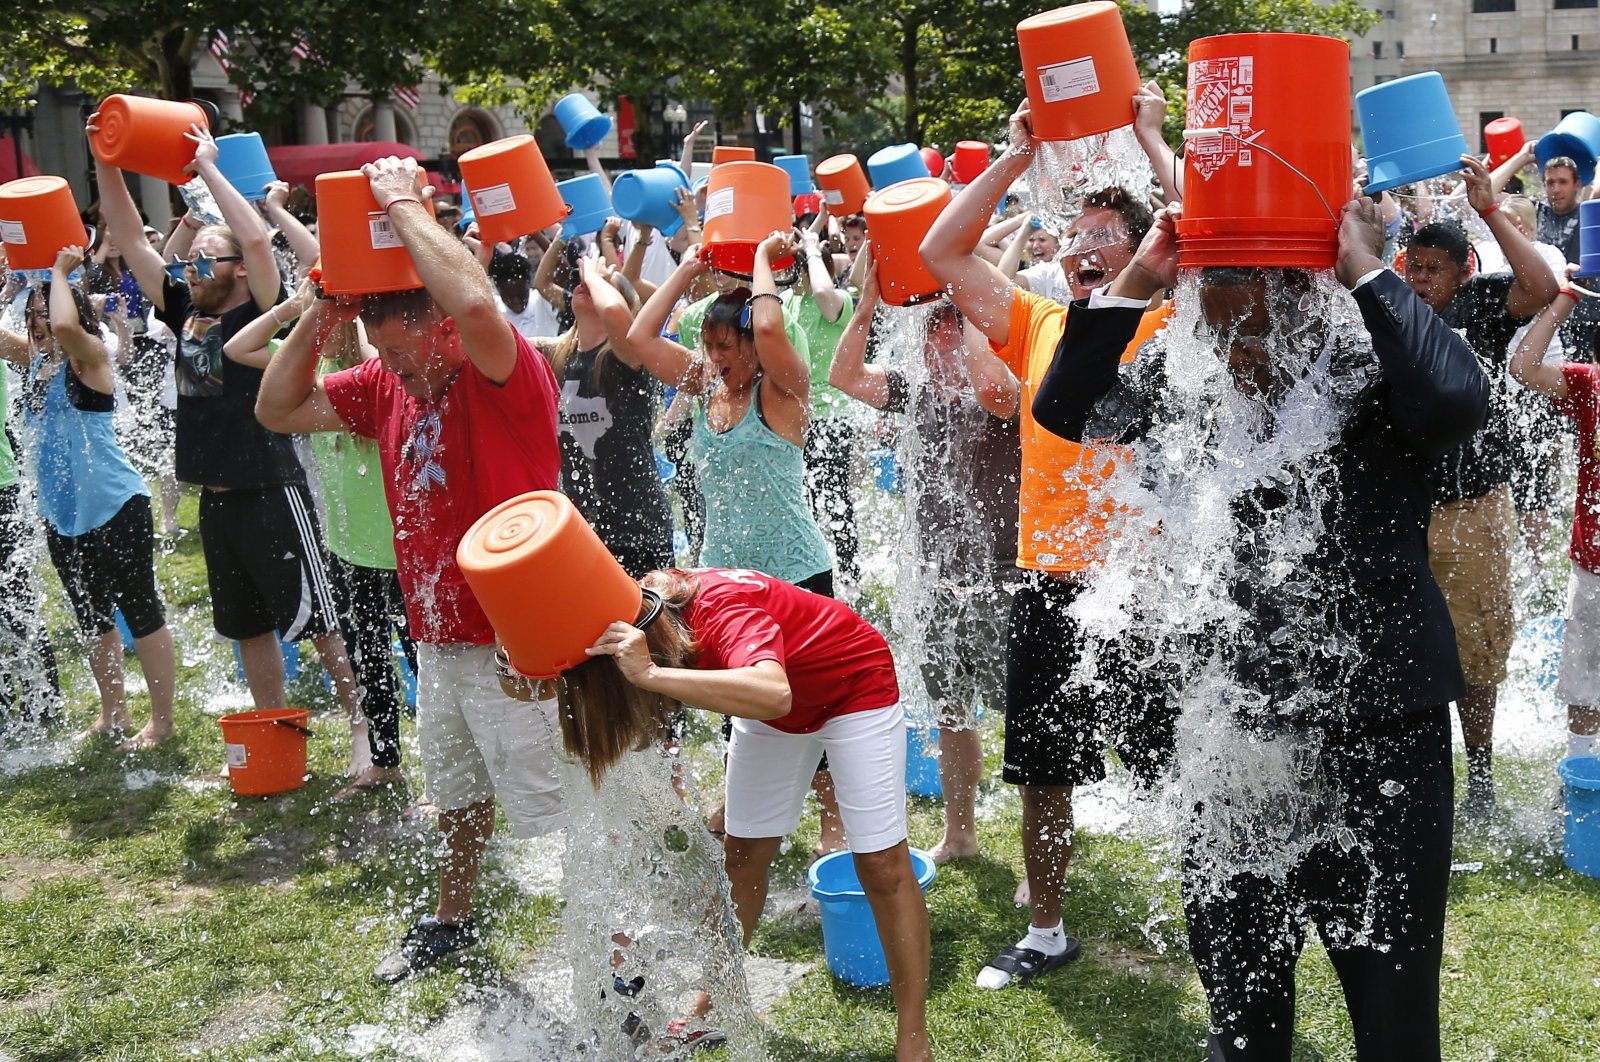 People participate in the Ice Bucket Challenge, in Boston, U.S., Aug. 7, 2014. (AP Photo)